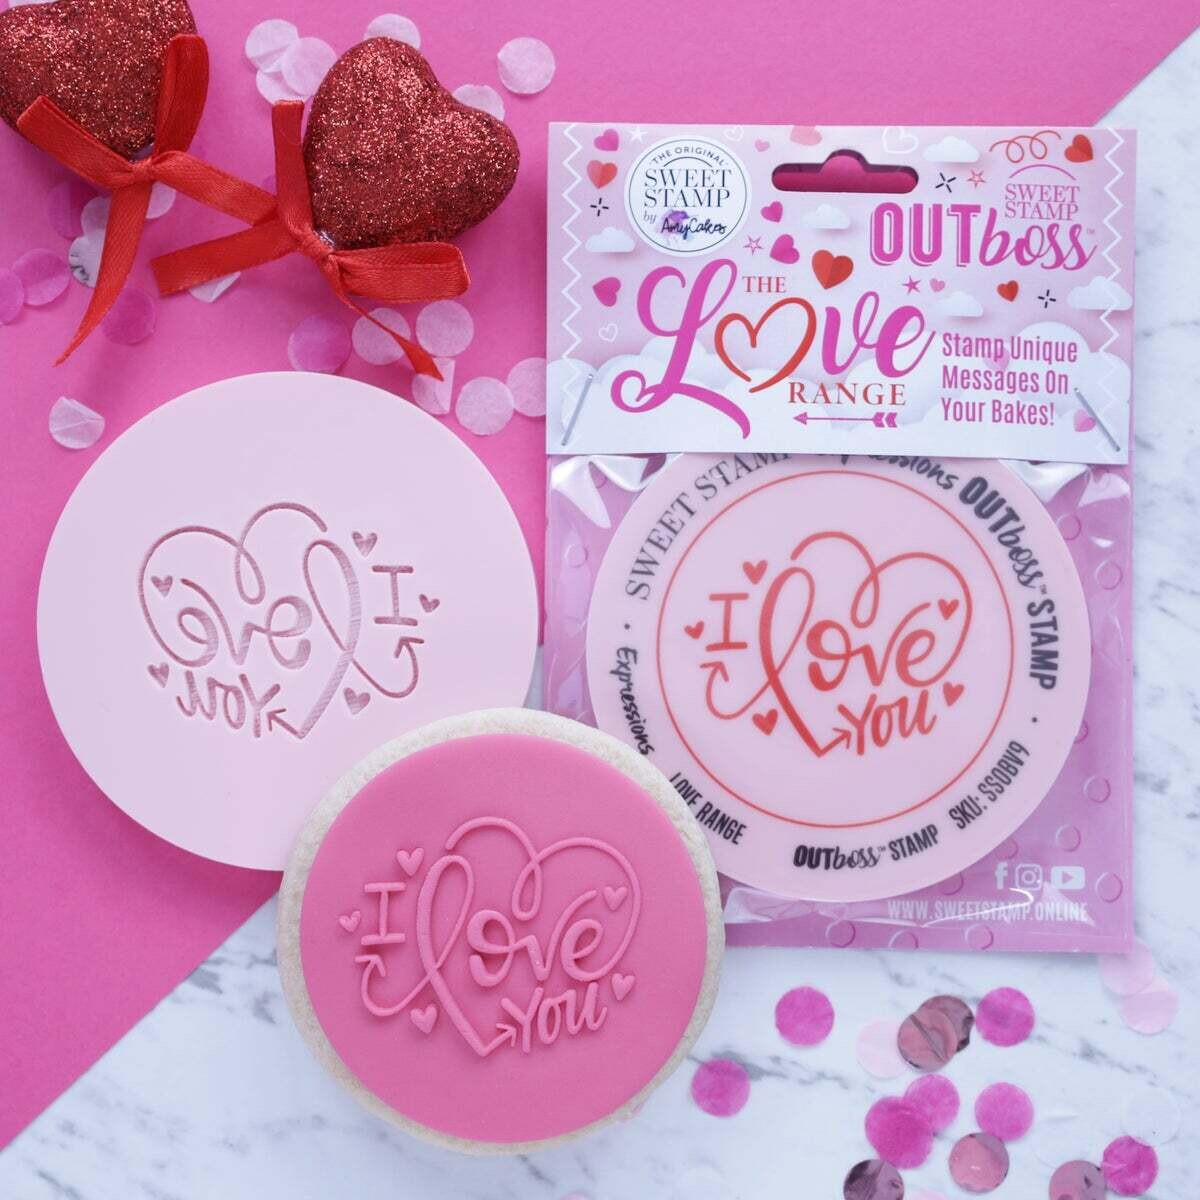 Sweet Stamp -OUTboss Expressions -'I LOVE YOU' HEART - Σφραγίδα